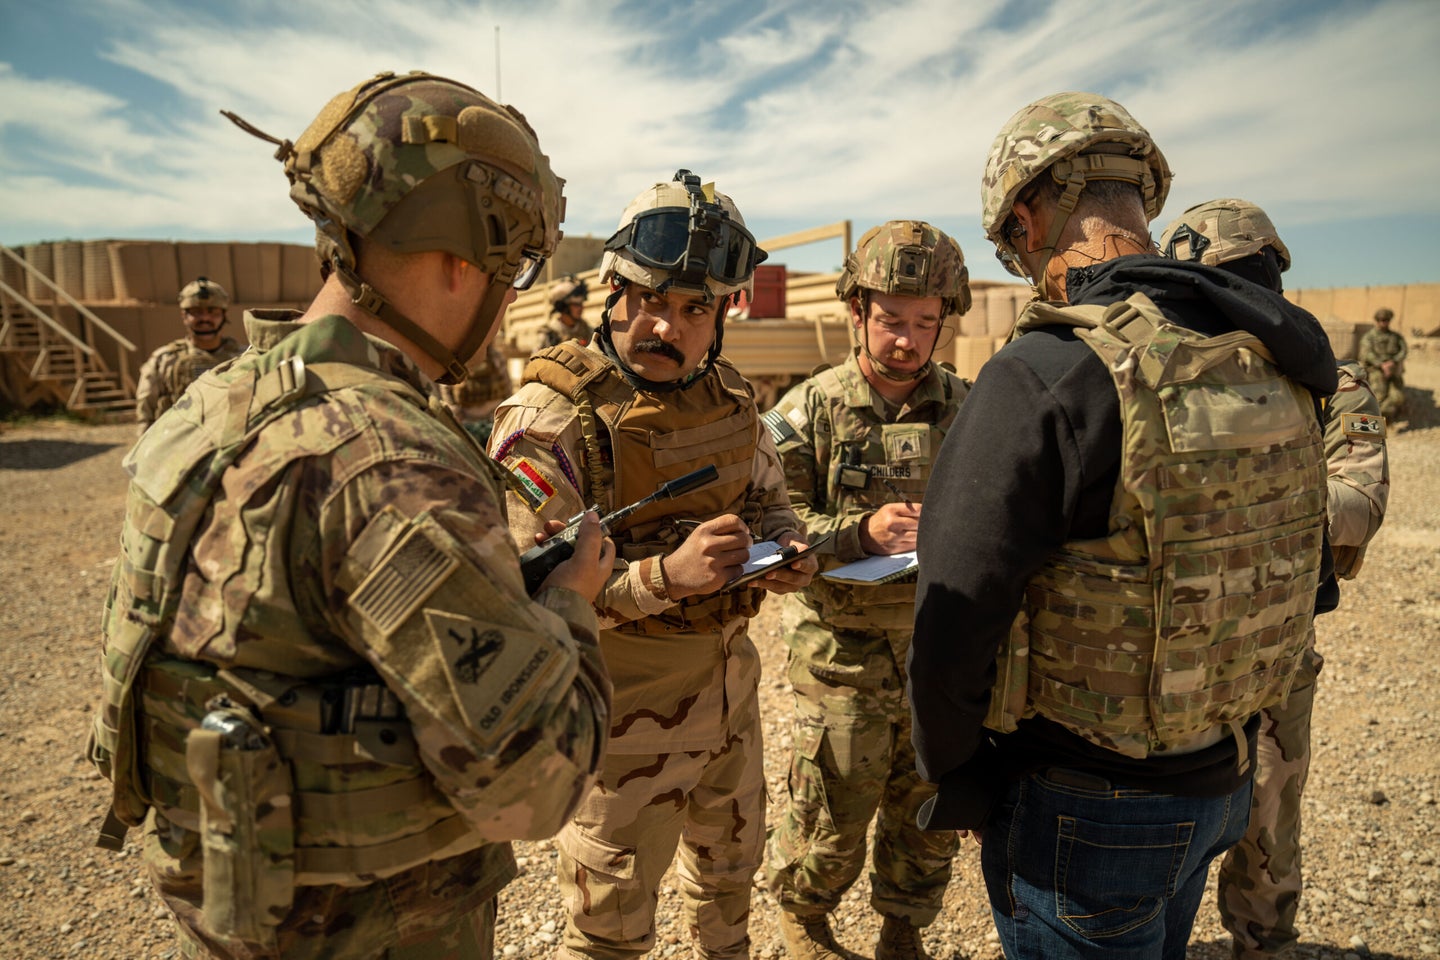 The Pentagon pushed back on reports that the U.S. is withdrawing from Iraq as the two countries announced a joint military commission focused on the next stage of its mission to defeat ISIS. (U.S. Army photo by Sgt. Terry Vongsouthi).